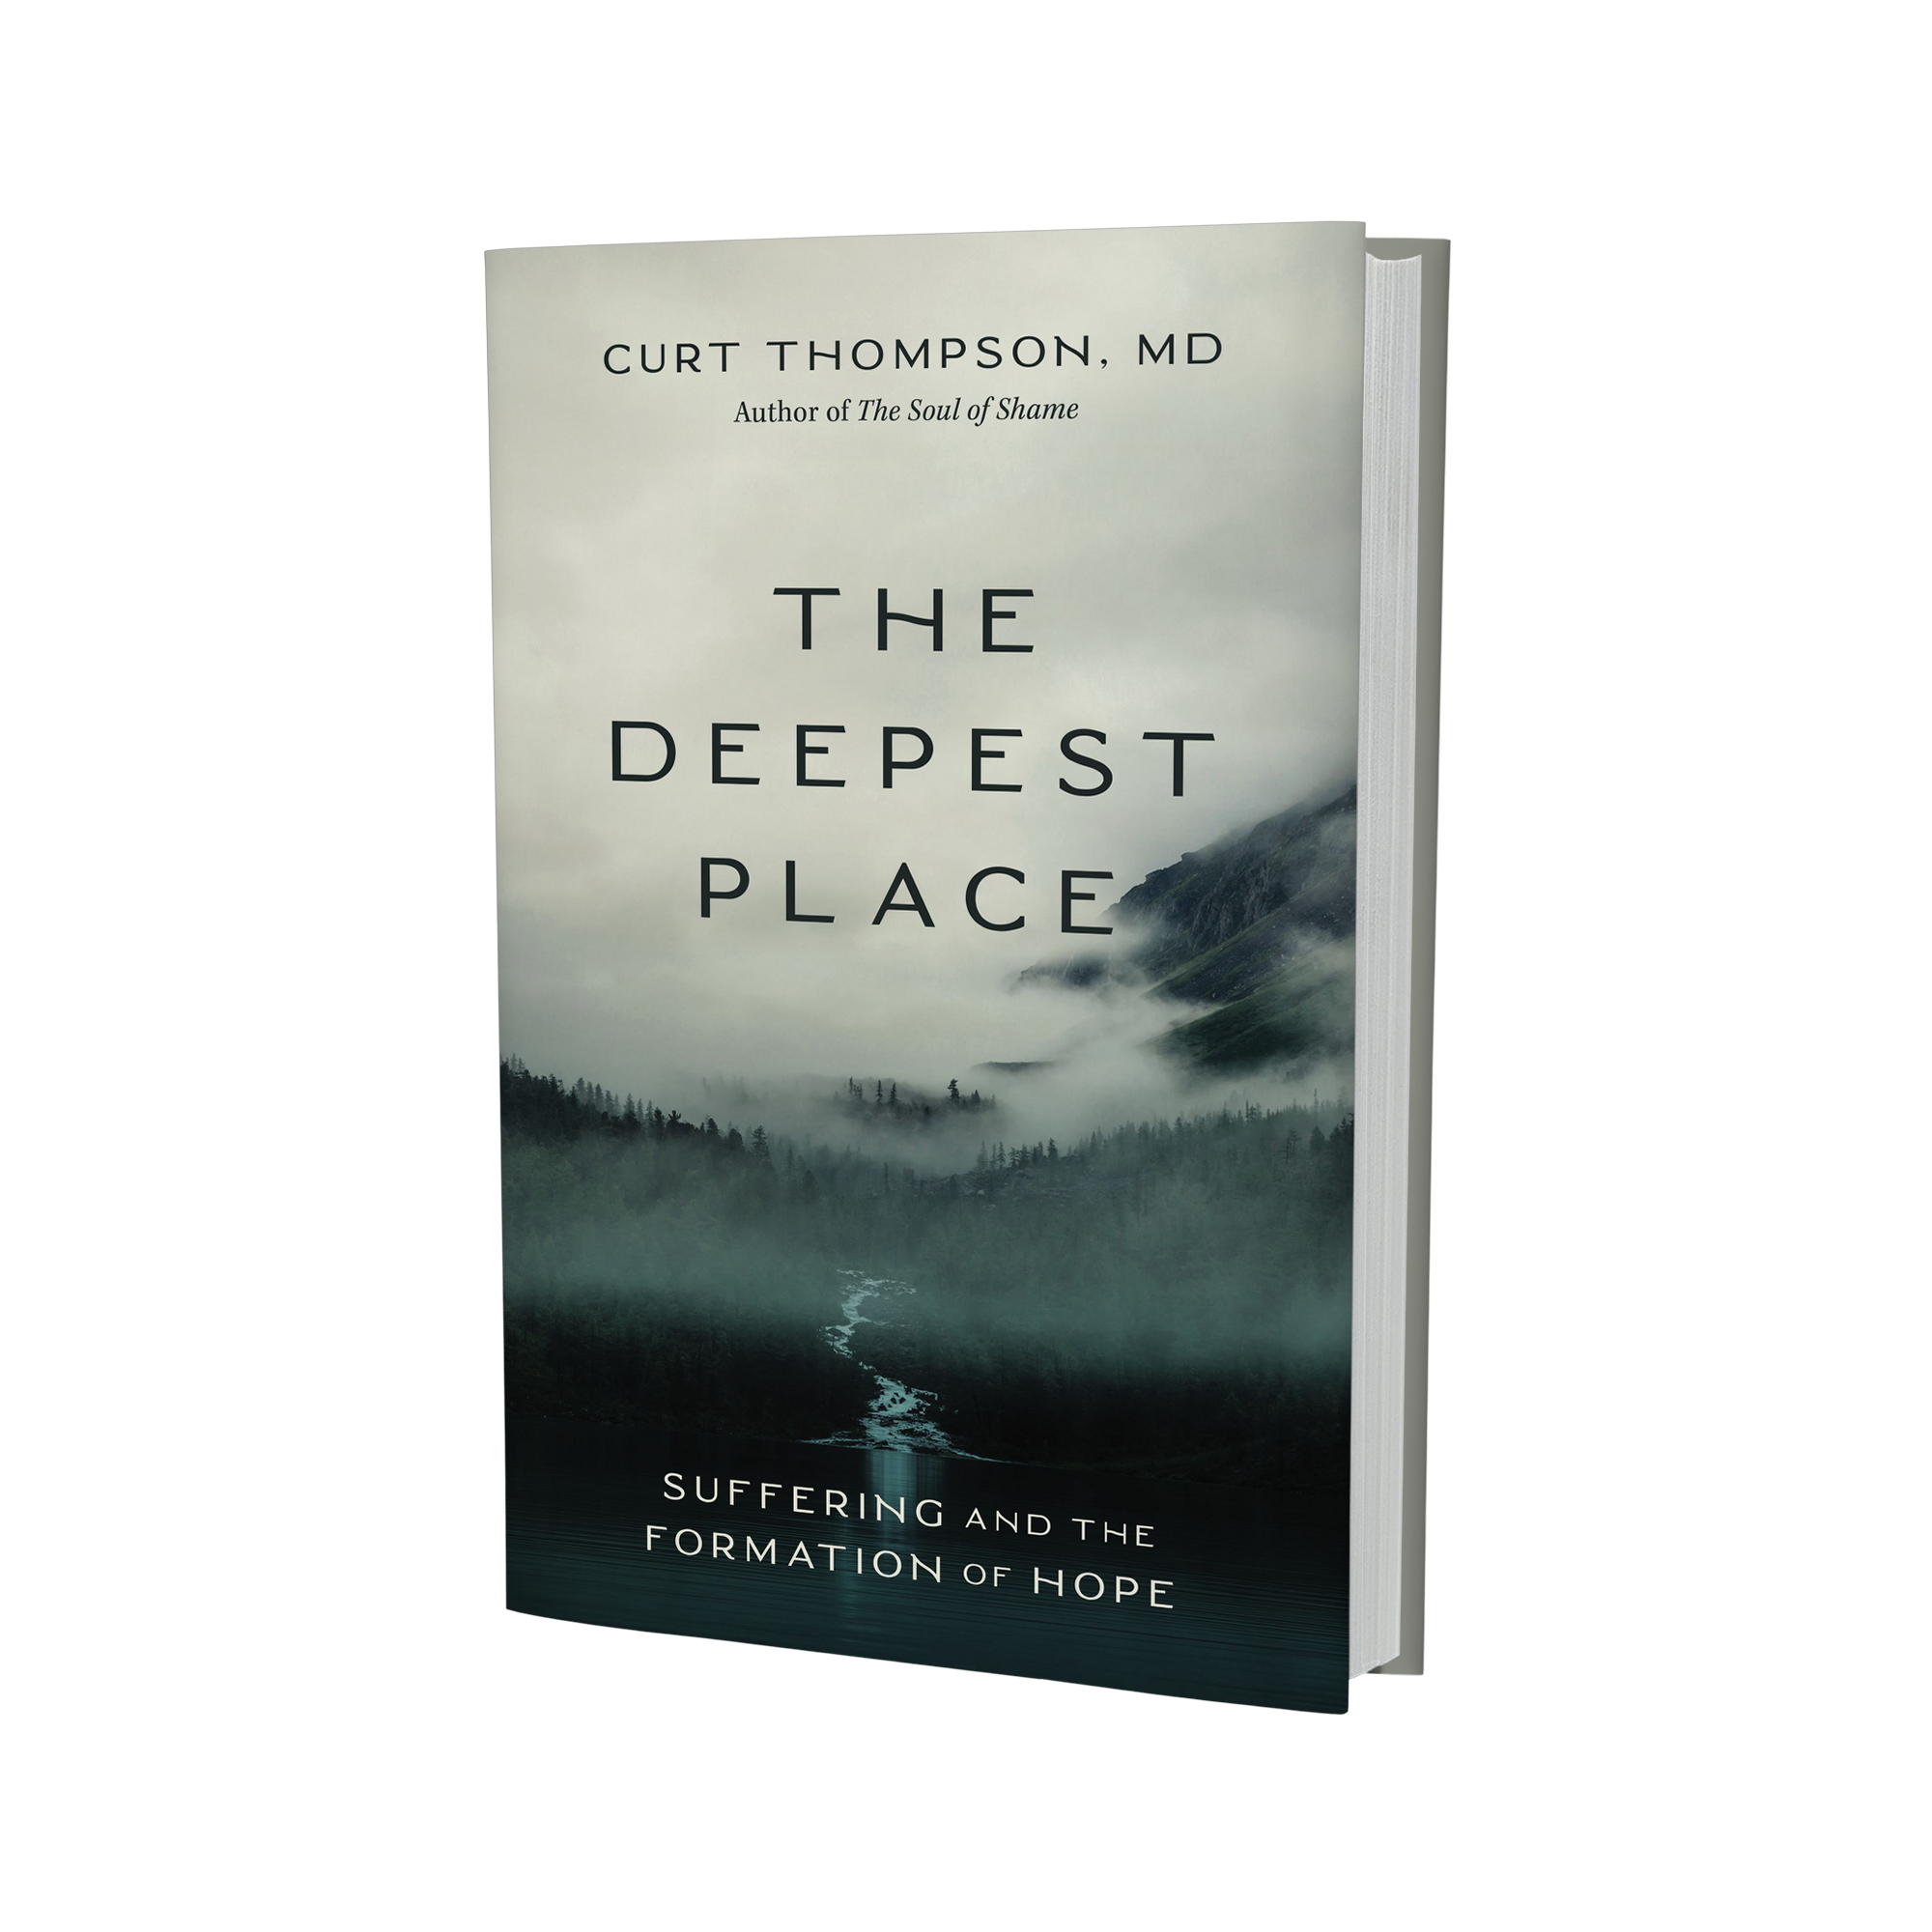 curt thompson the deepest place cover art